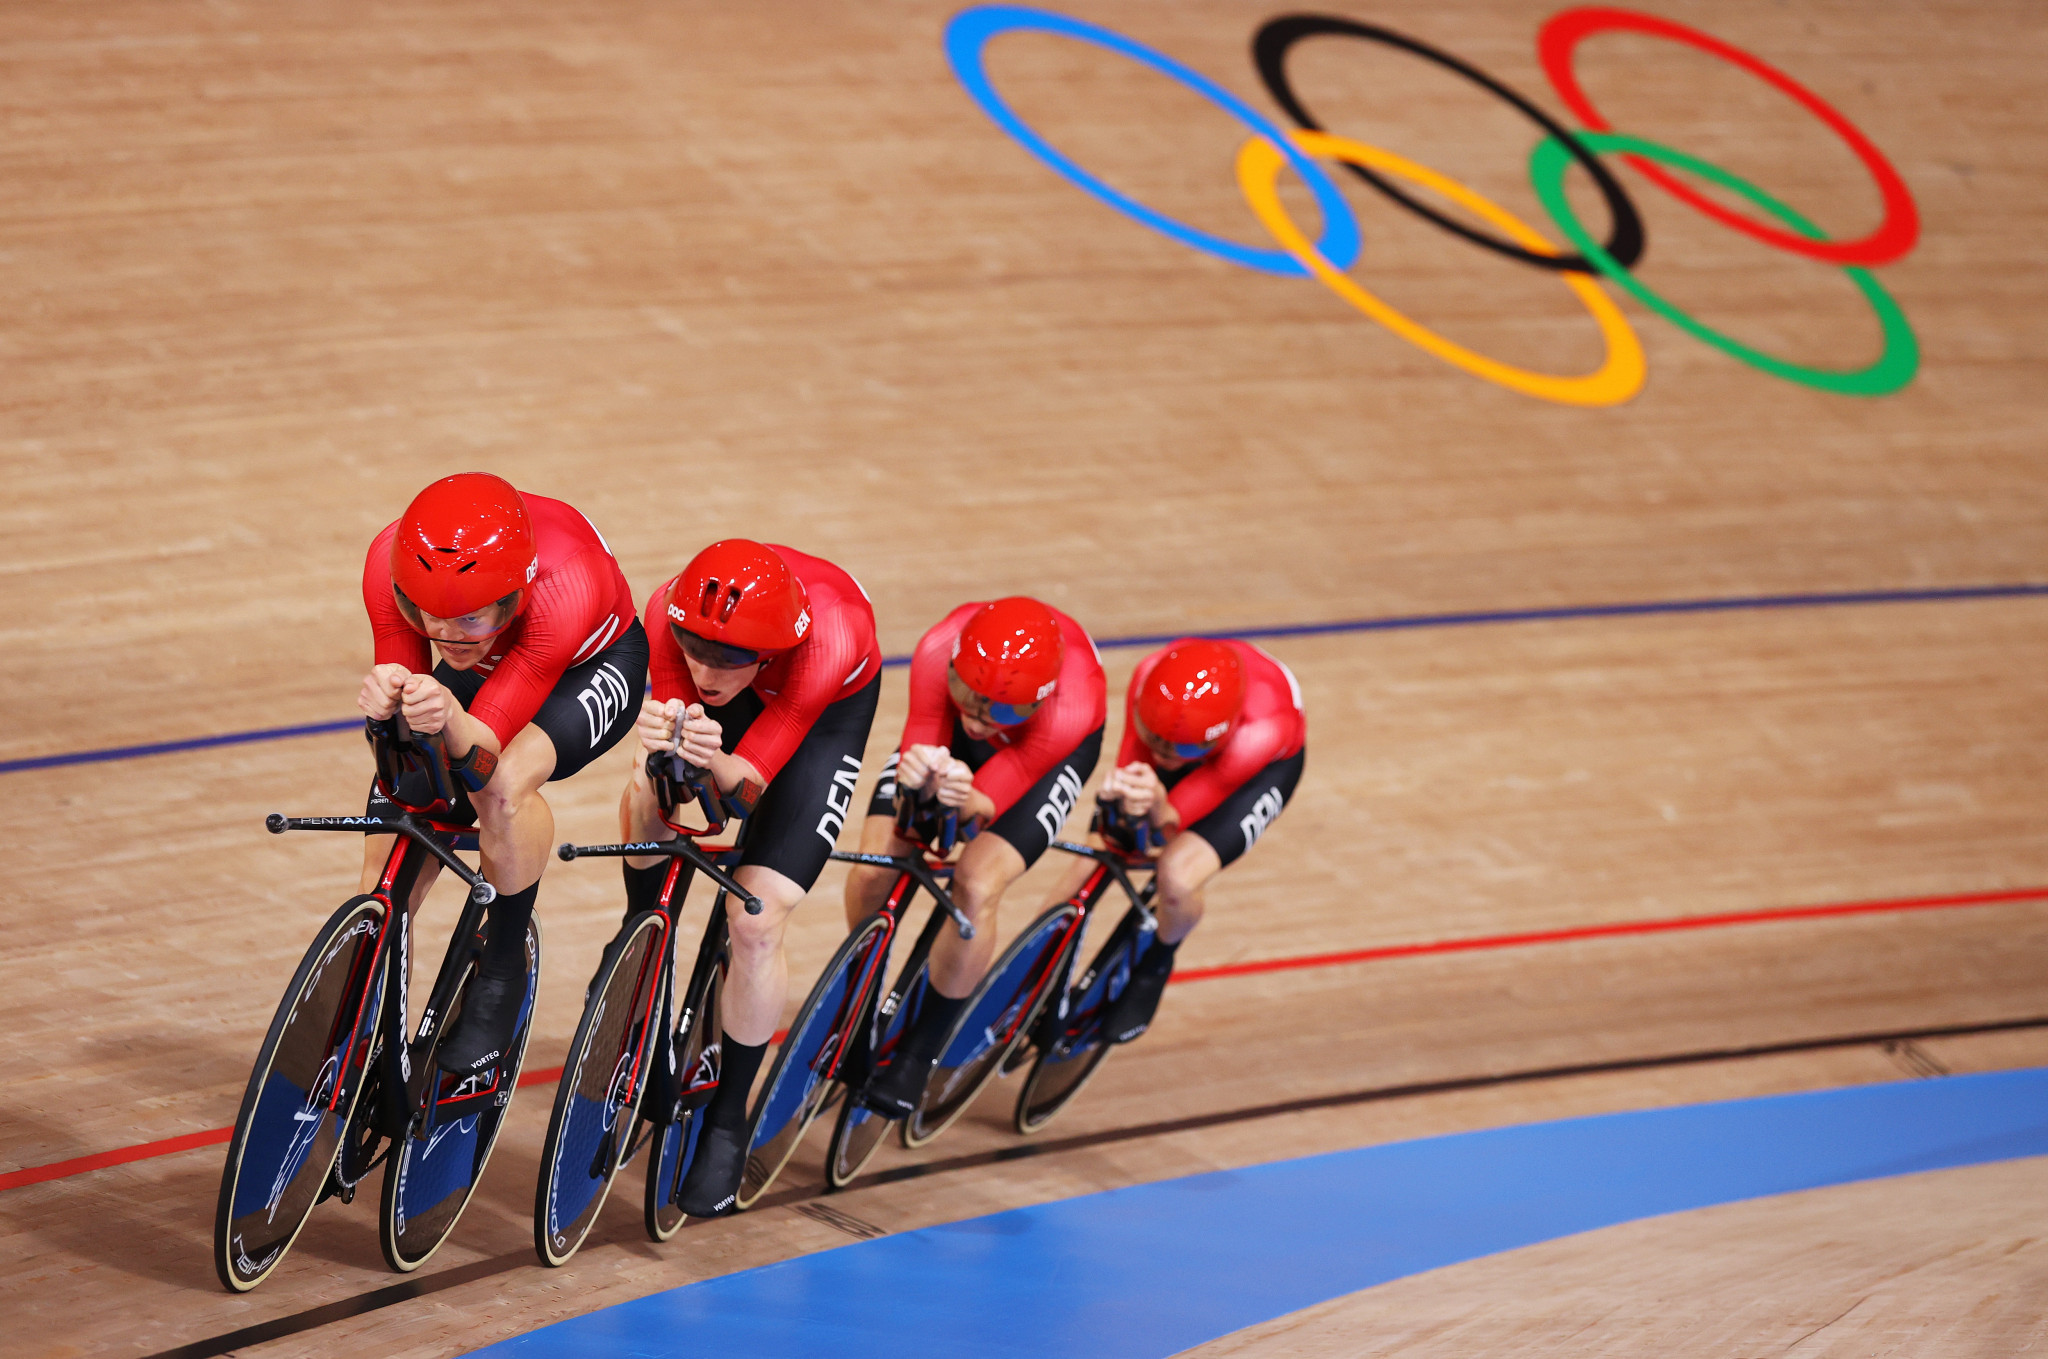 Denmark claimed men's team pursuit silver at Tokyo 2020 with the help of British rider Dan Bingham ©Getty Images